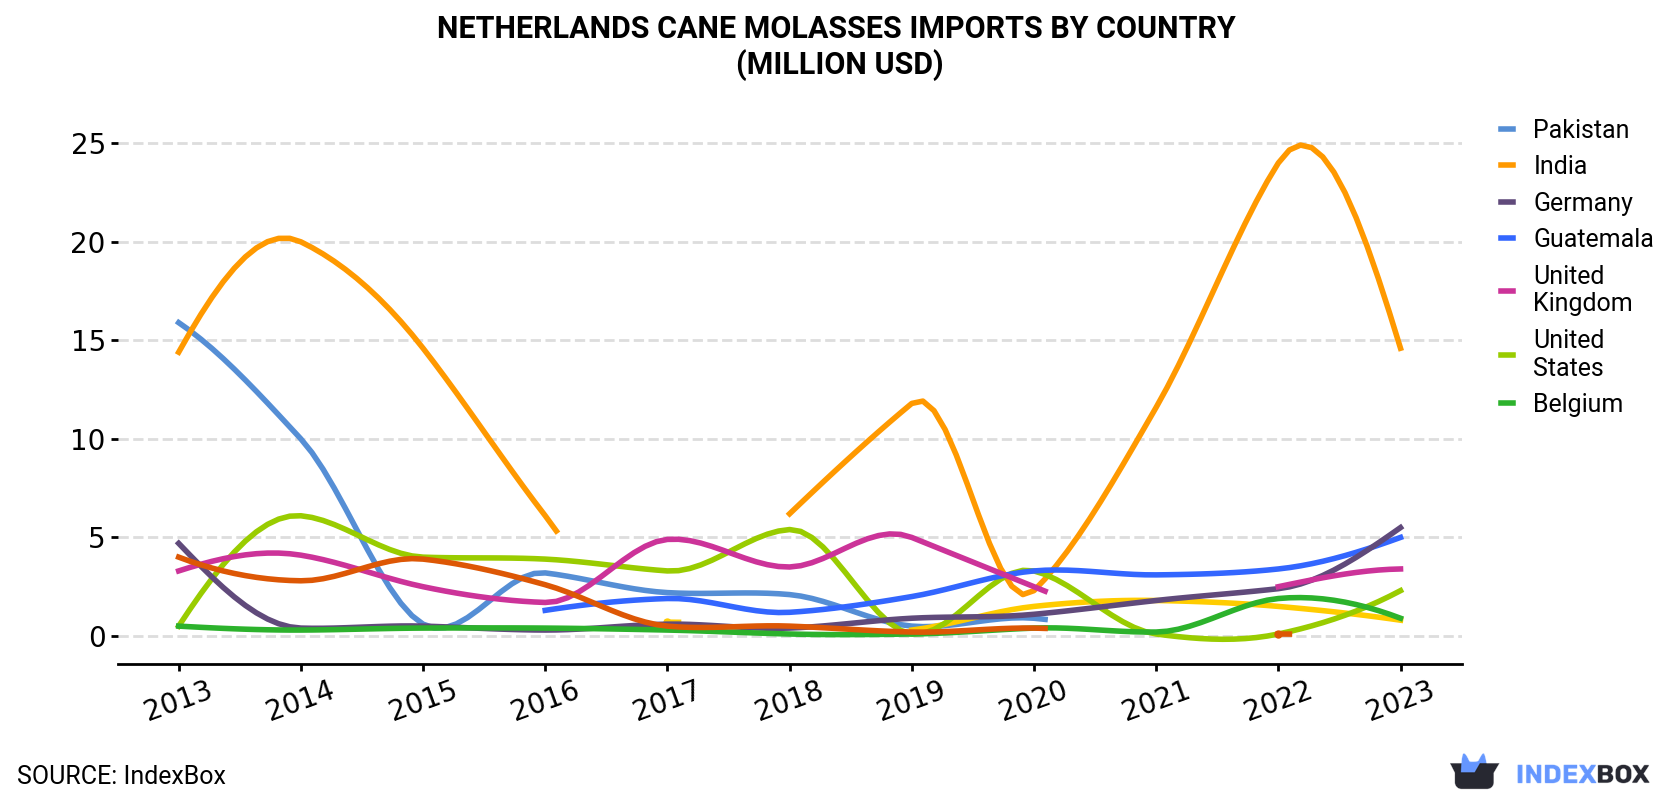 Netherlands Cane Molasses Imports By Country (Million USD)